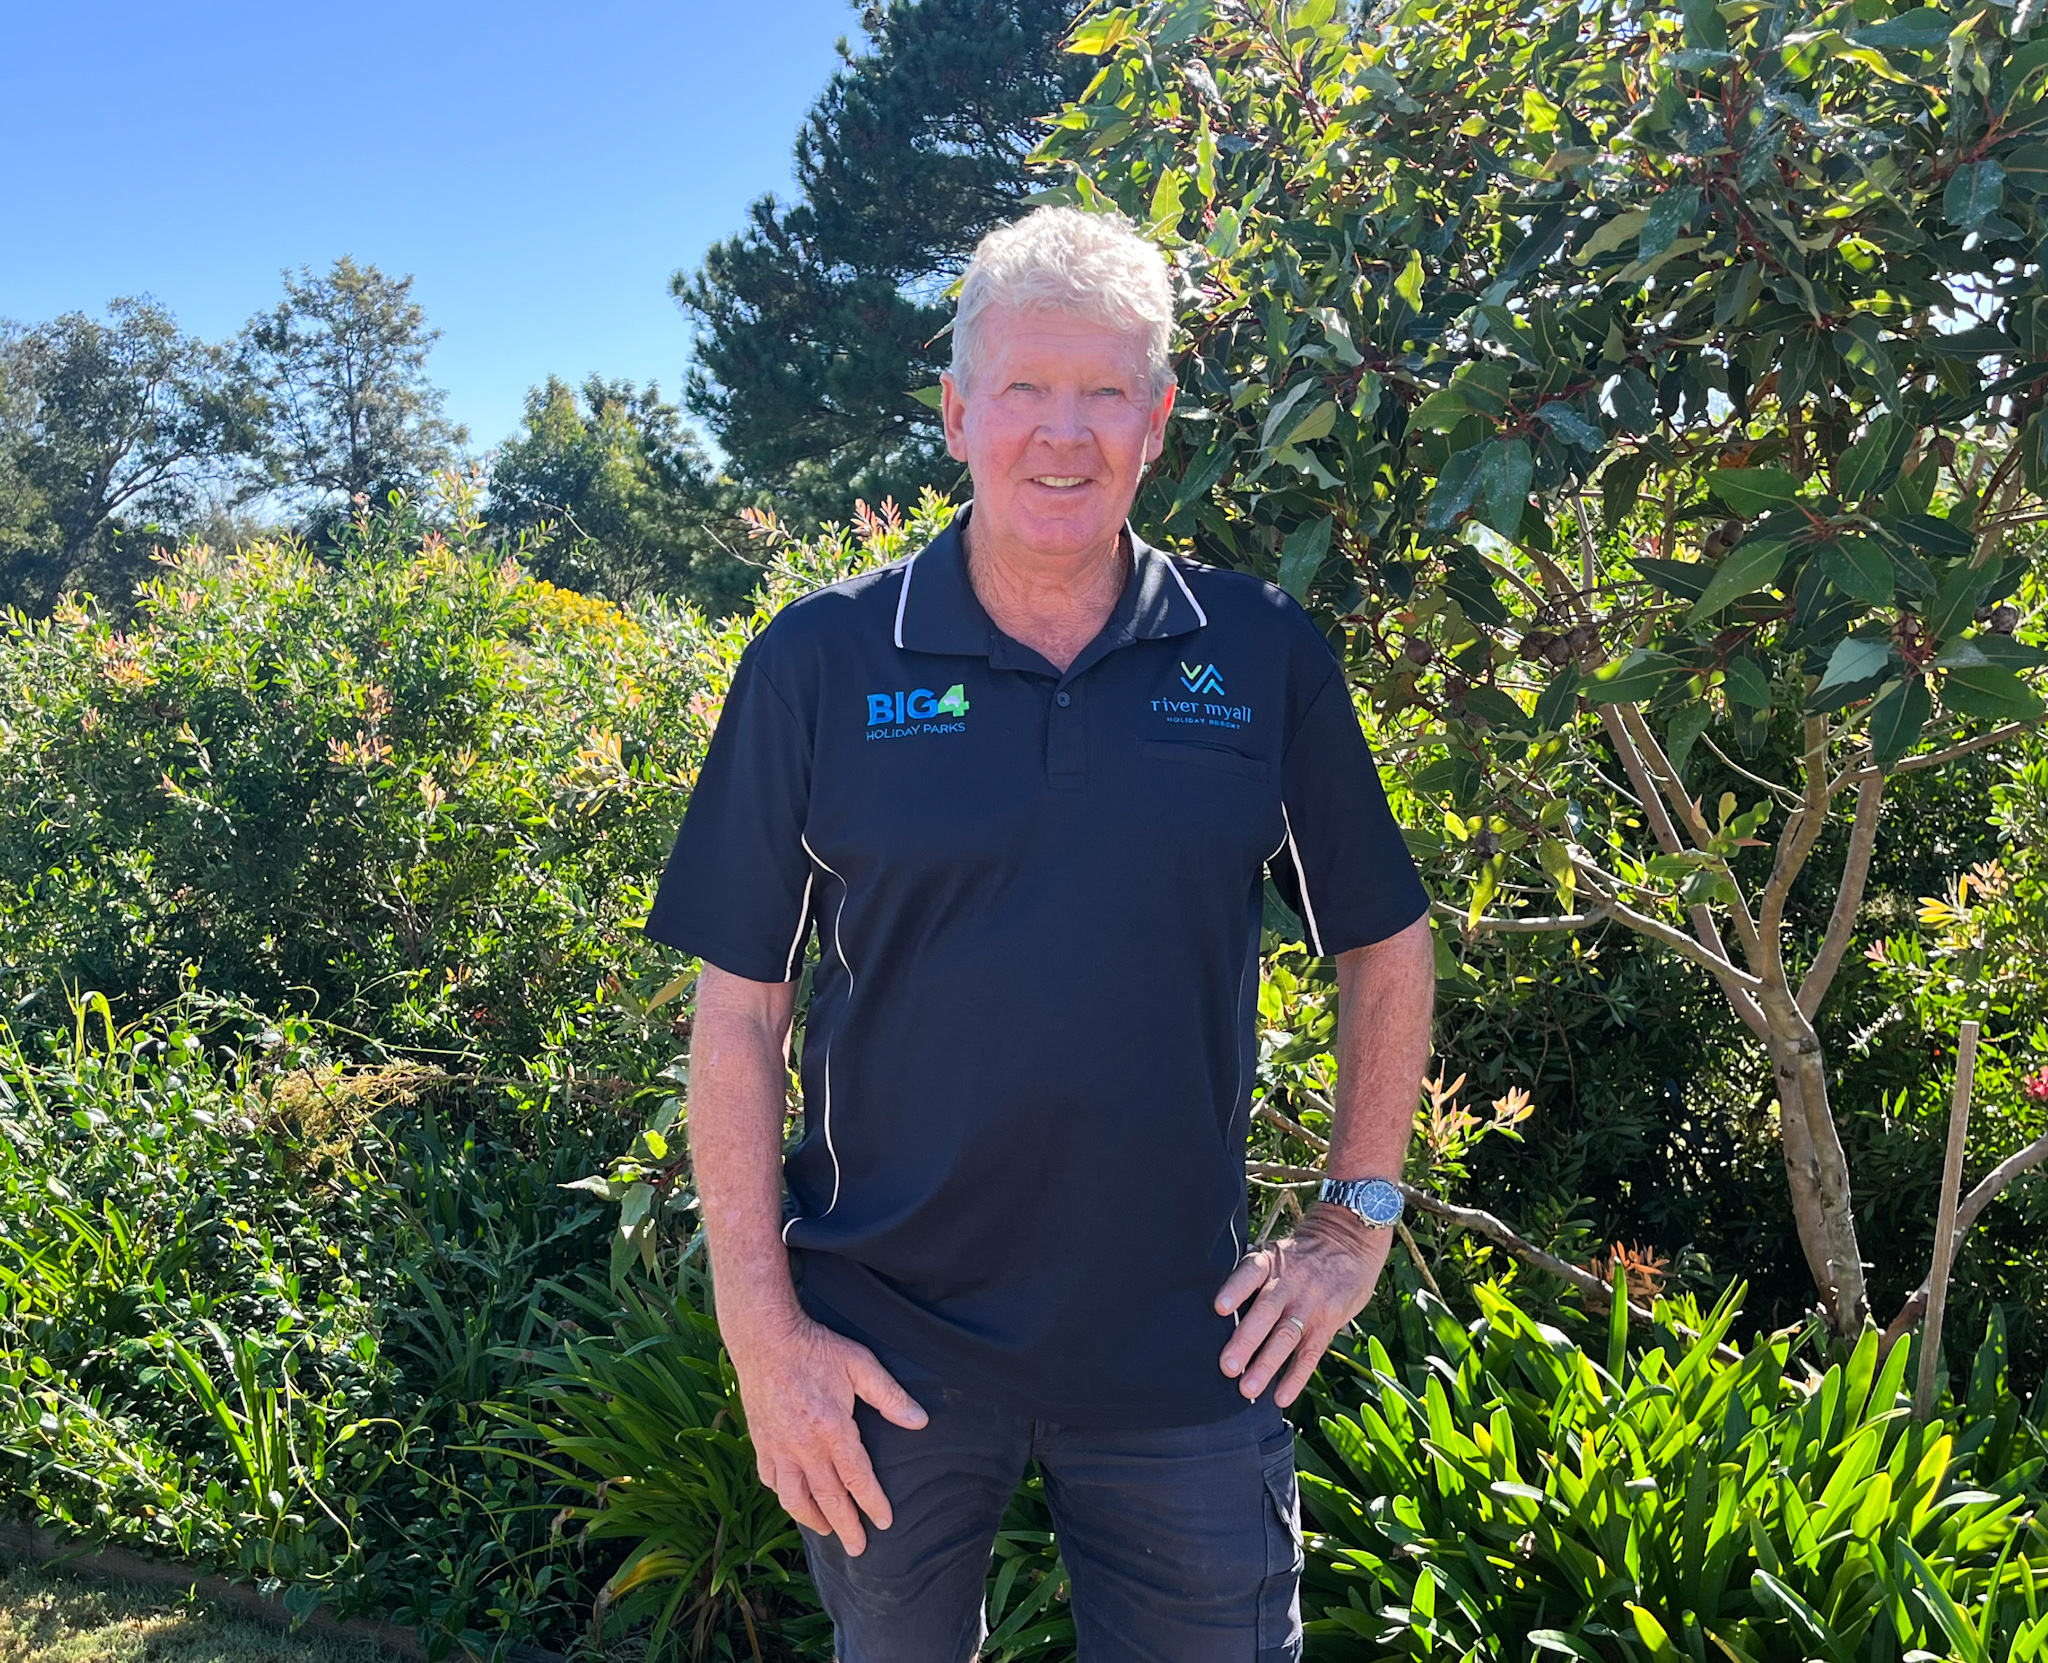 Man with grey hair and a navy shirt standing in front of green trees and shrubs.